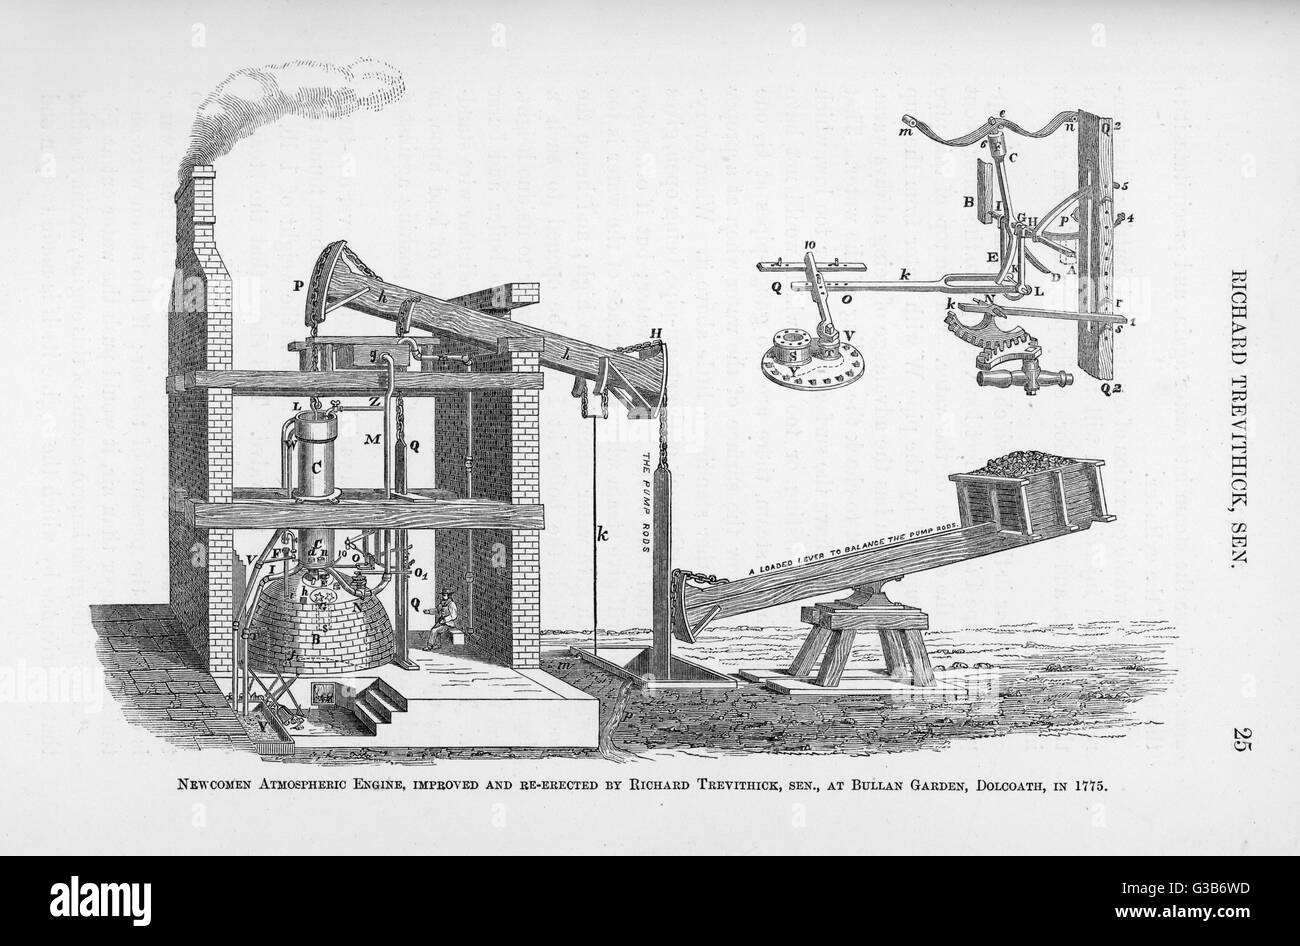 Newcomen atmospheric engine  modified by Richard  Trevithick, senior, at Bullan  Garden, Dolcoath in 1775      Date: 1775 Stock Photo